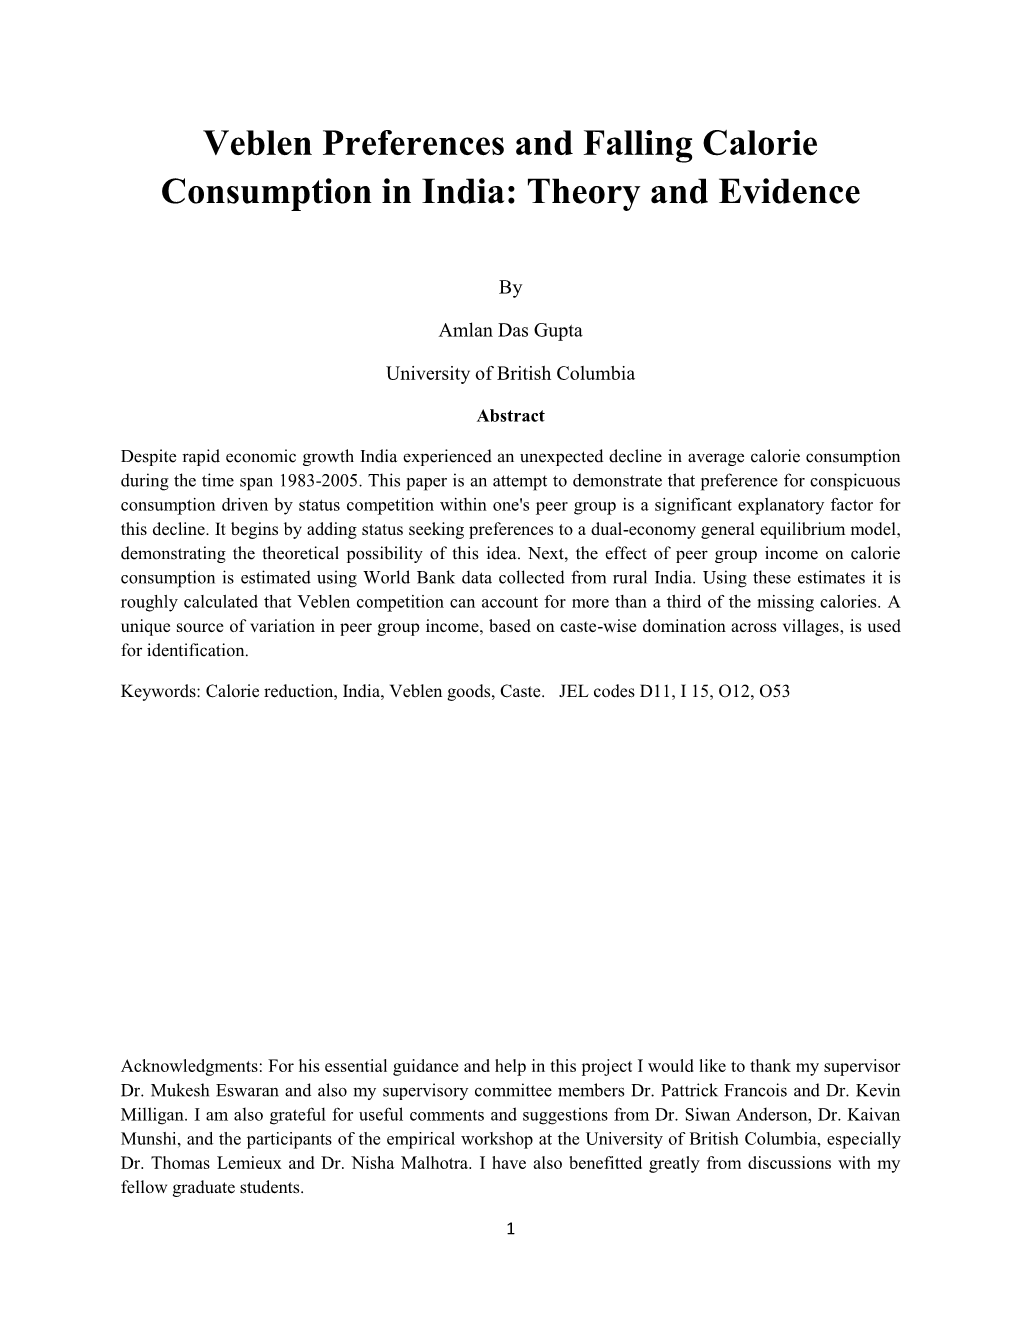 Veblen Preferences and Falling Calorie Consumption in India